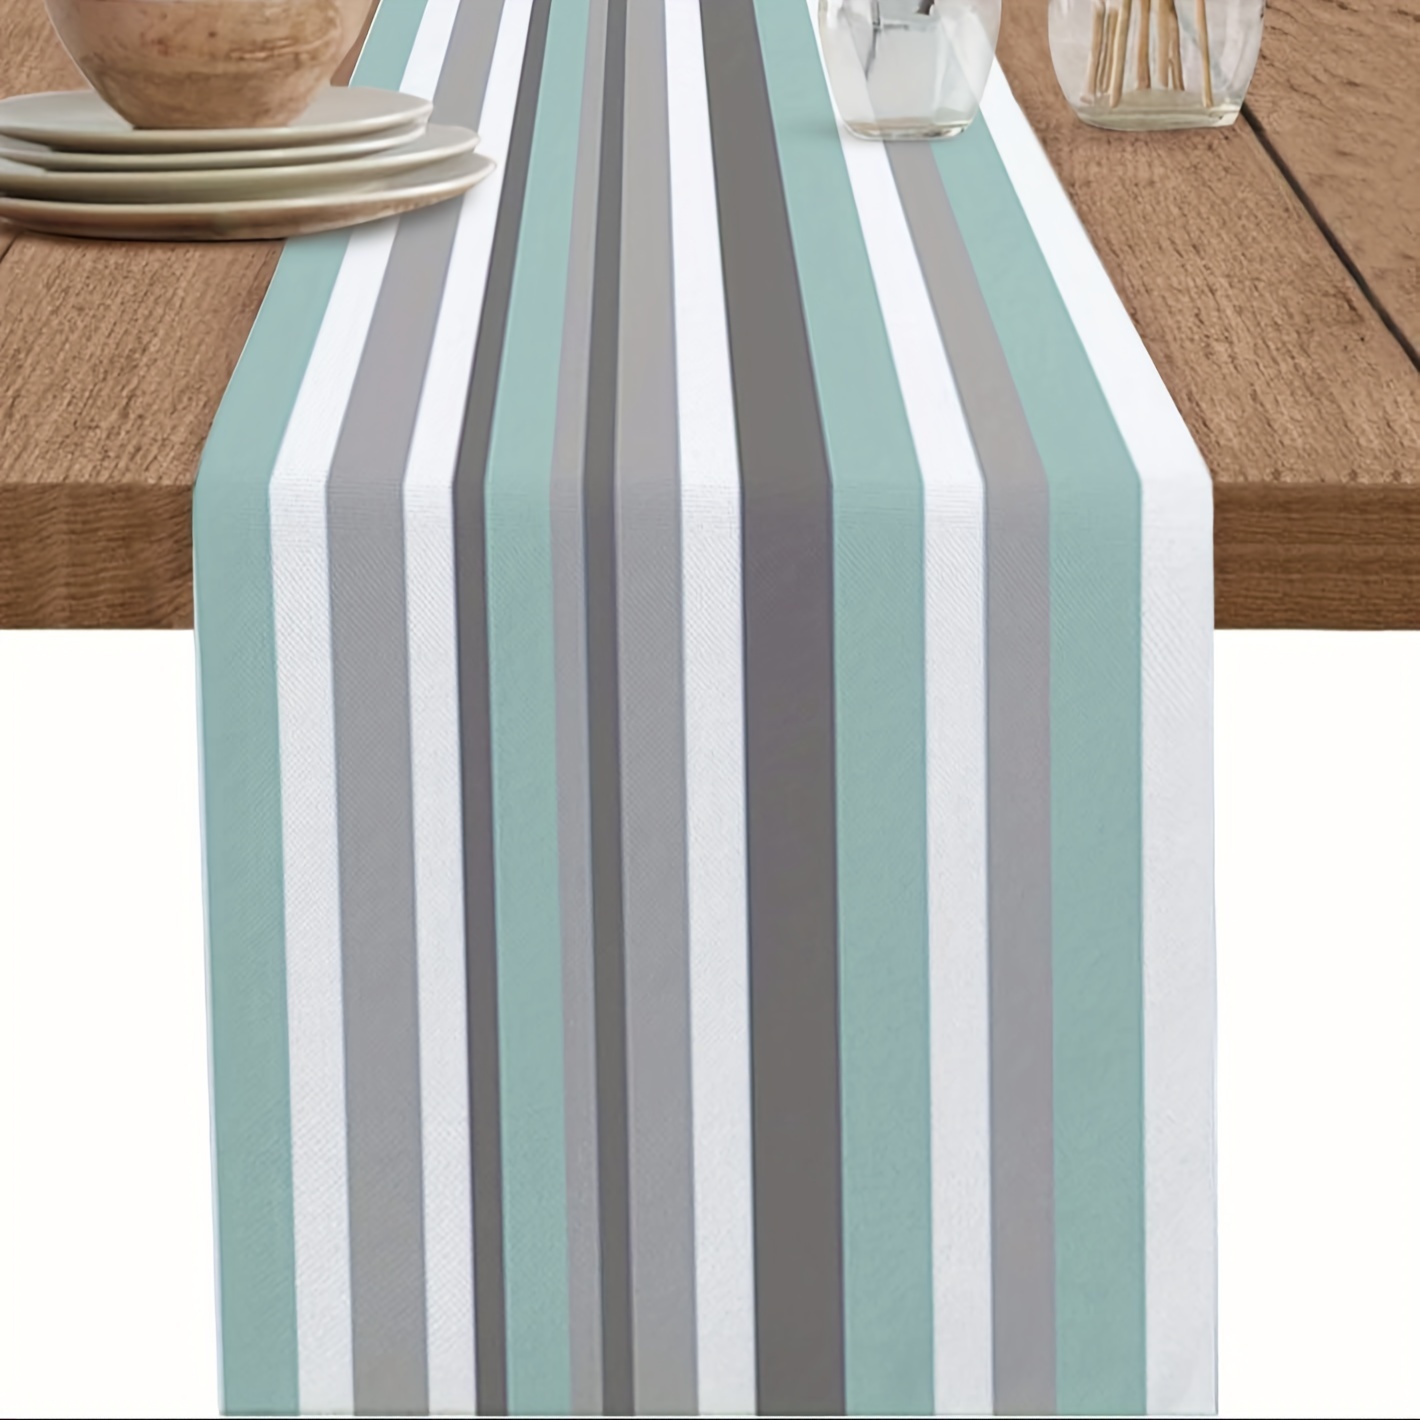 

1pc, Table Runner, Minimalist Style Stripe Linen Table Runner, Geometric Printed Table Runner, Teal Grey White Striped Dresser Scarf, Washable Kitchen Dinning Table Decor For Indoor, Party Decor